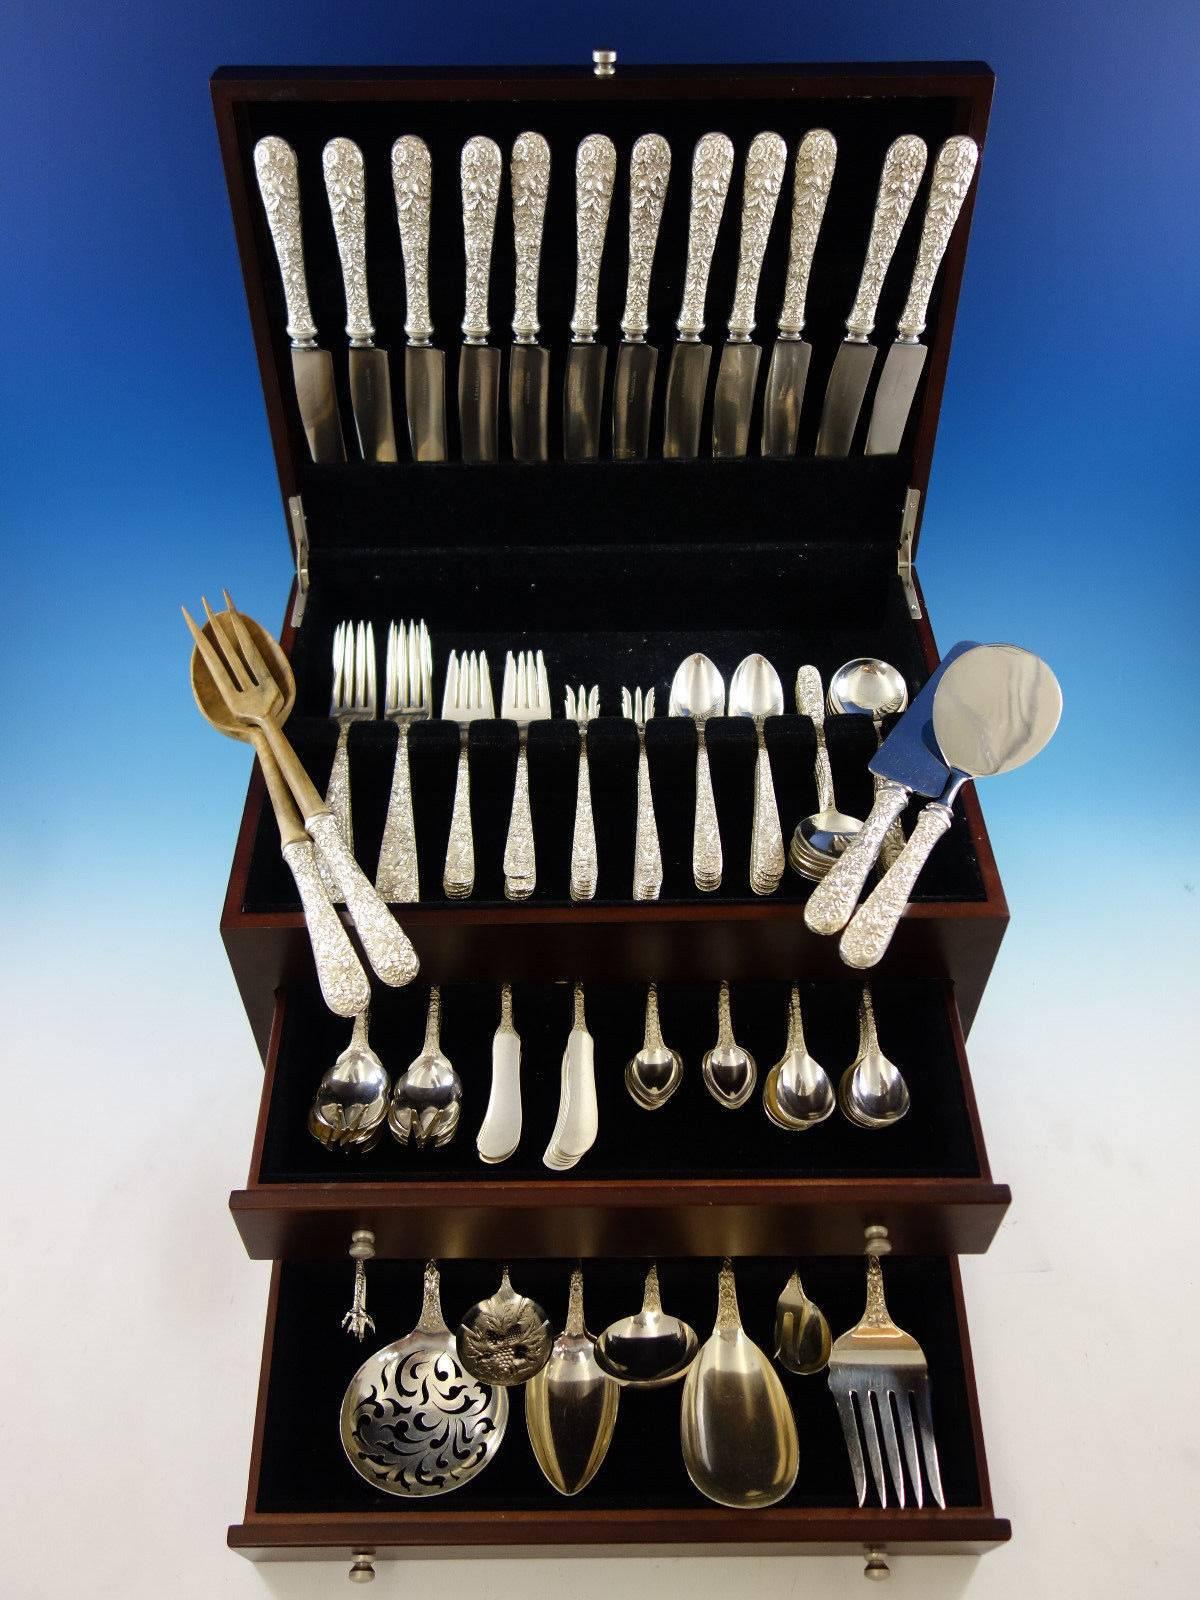 Repousse by Kirk sterling silver flatware set, 134 pieces. This set includes: 

12 dinner size knives, 9 3/4